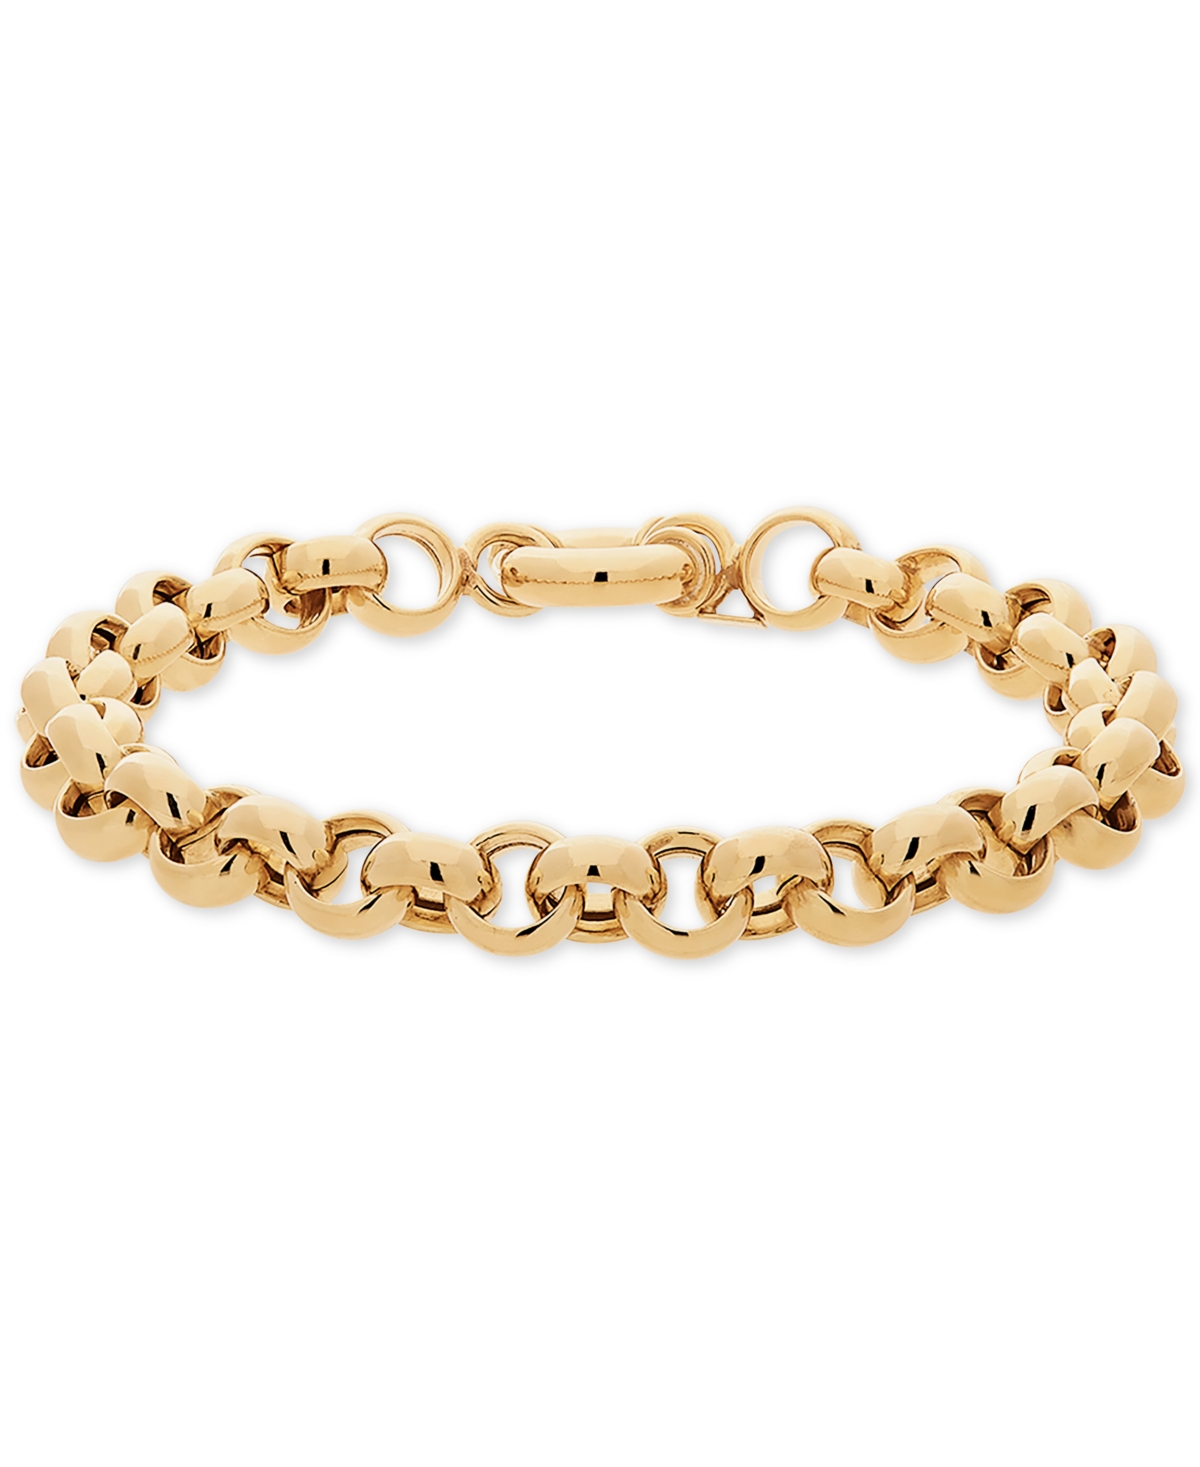 Italian Gold Round Rolo Link Bracelet in 14k Gold-Plated Sterling Silver